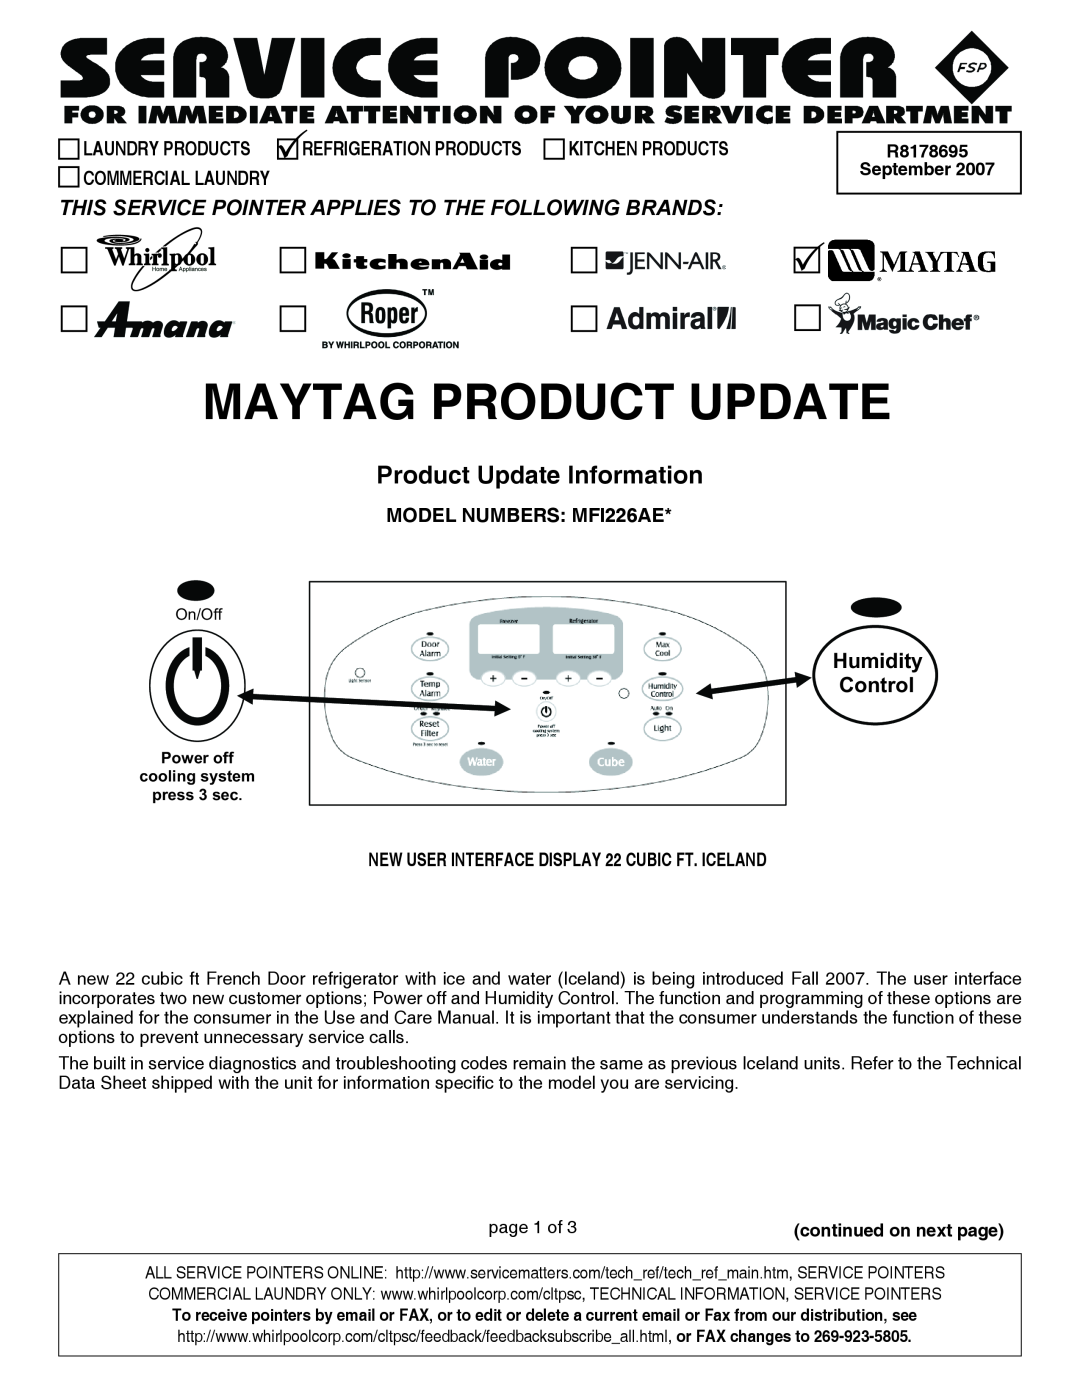 Whirlpool MFI226AE manual Humidity Control, R8178695 September, continued on next page, Maytag Product Update 